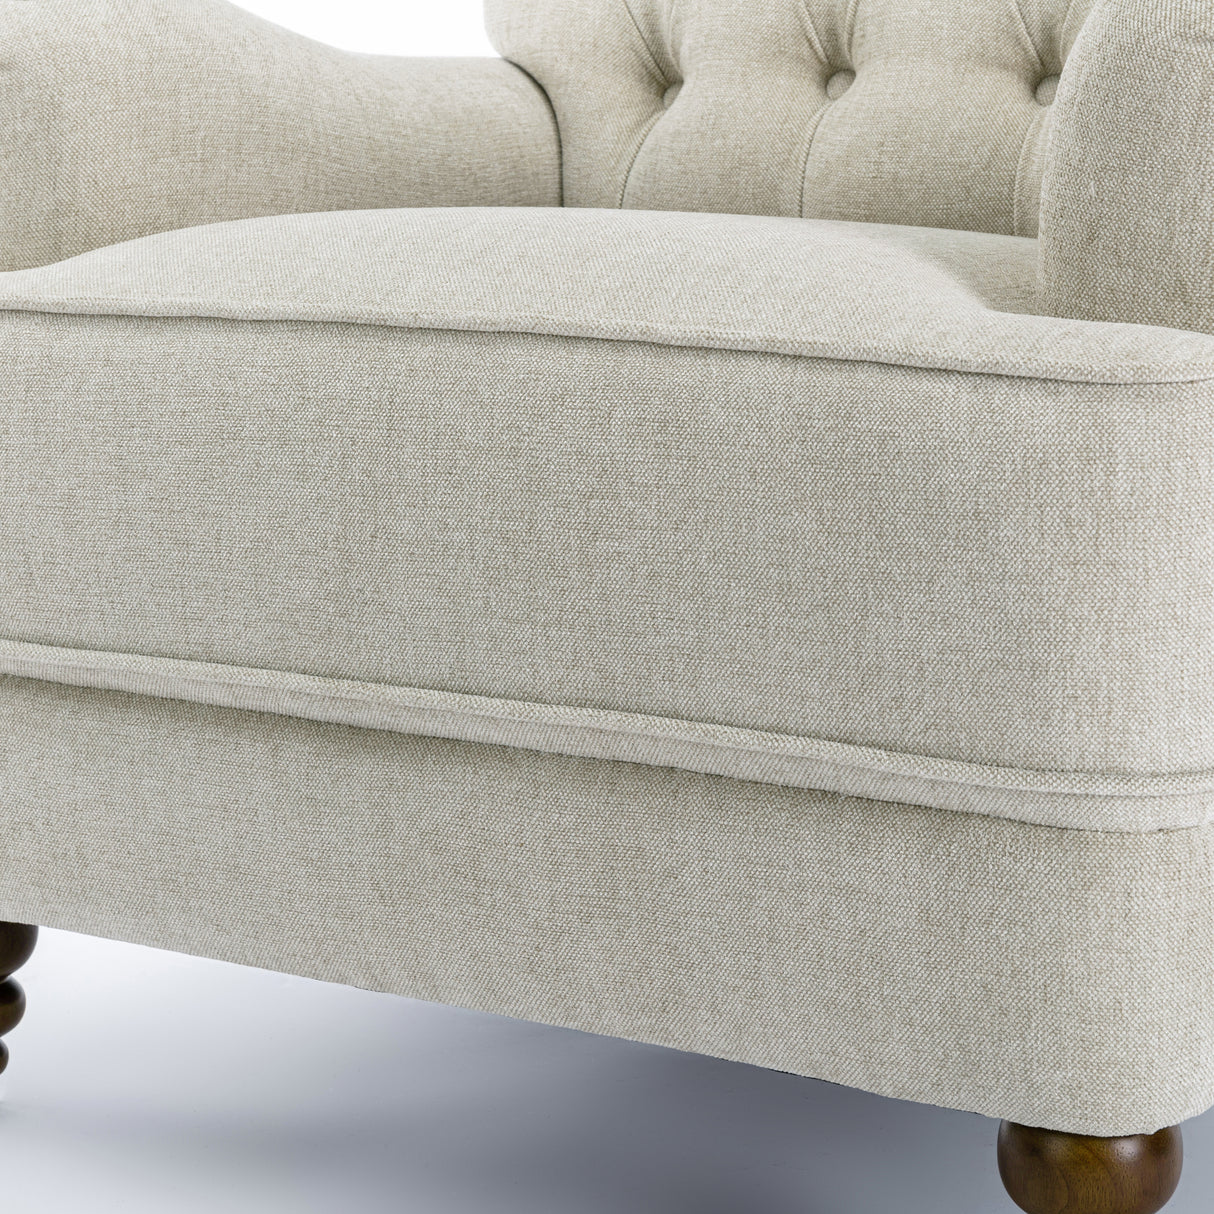 Butner Tufted Arm Chair - Sea Oat - Home Elegance USA